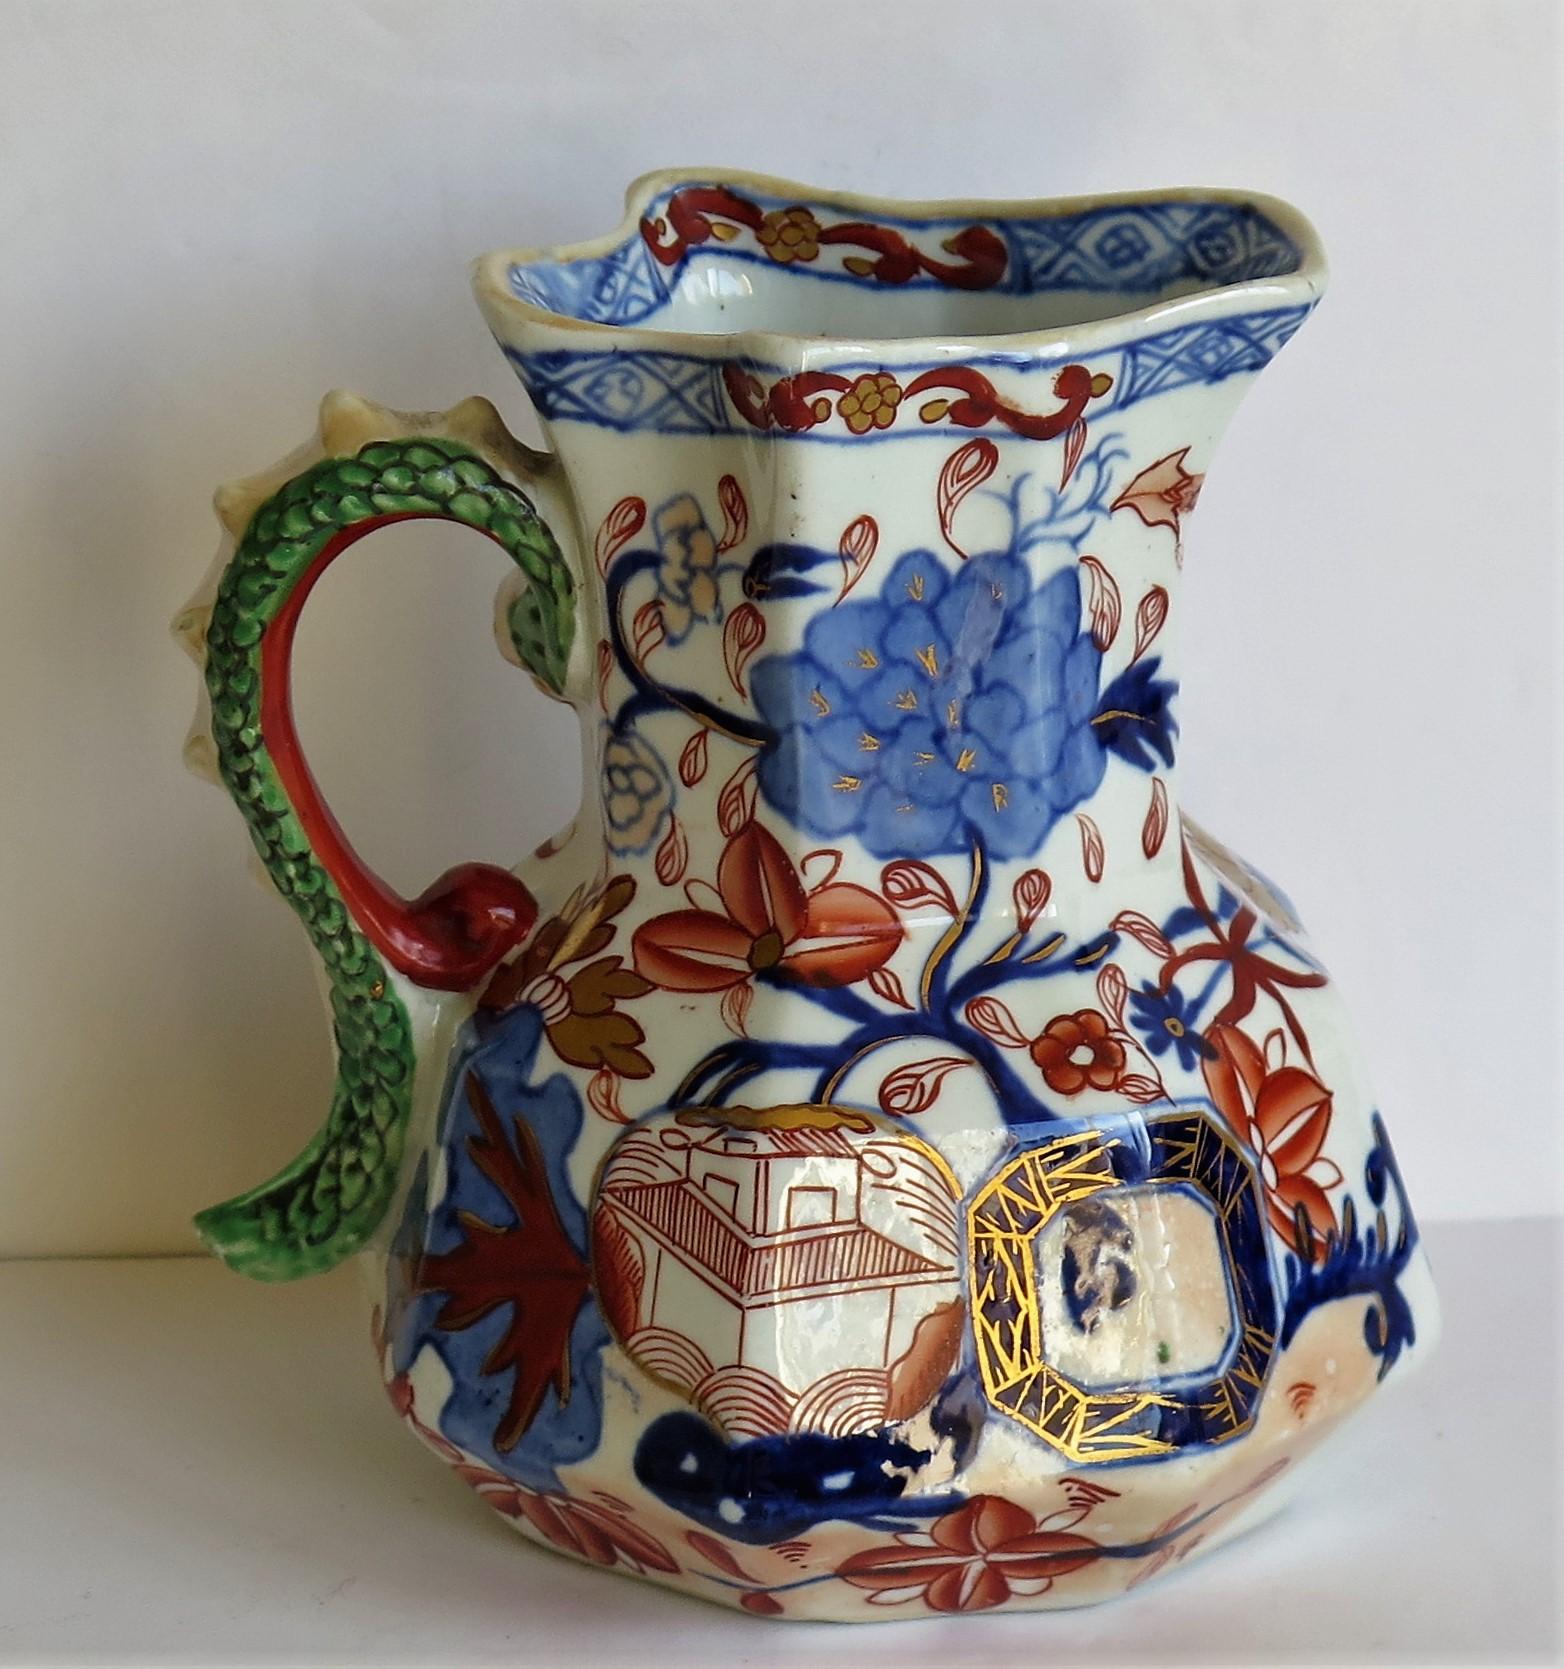 This is a very good, very early Mason's Ironstone Hydra jug or pitcher in the gilded jardinière pattern, dating to the late George 111rd period, circa 1813-1815. 

The jug has an octagonal hydra shape with a notched snake handle and is hand